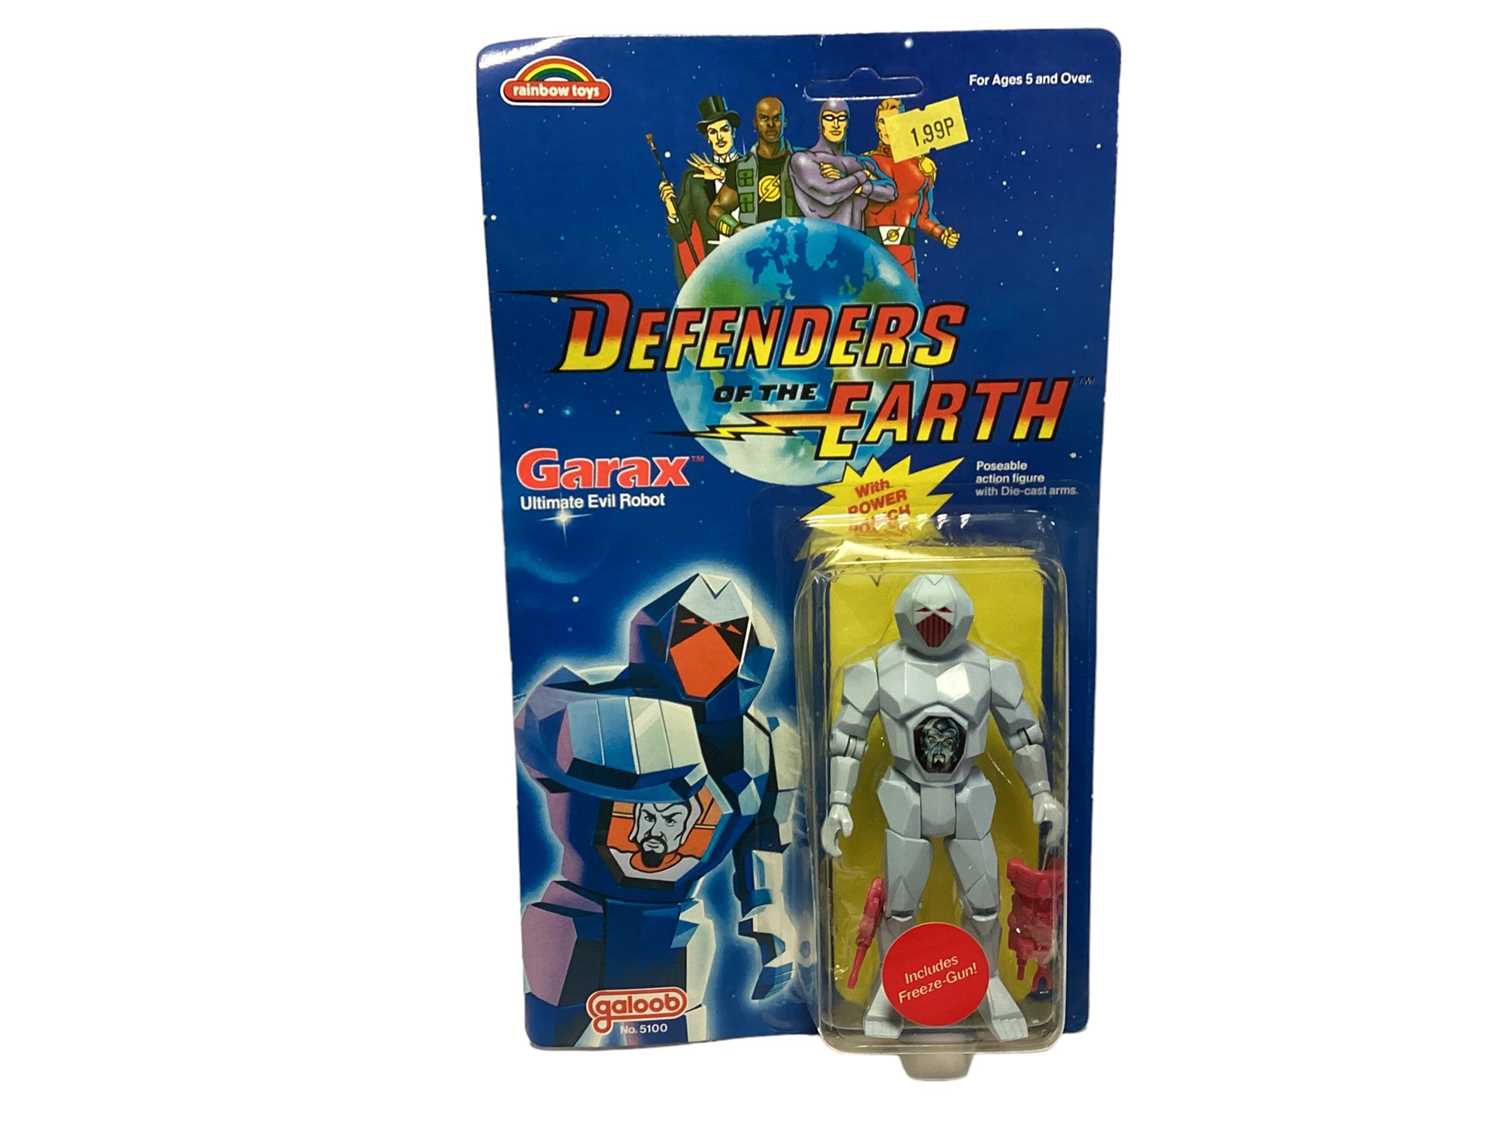 Lot 87 - Galoob (c1985) Defenders of the Earth Garax (ultimate Evil Robot) 5" action figure, on punched card with bubblepack No.5100 (1)